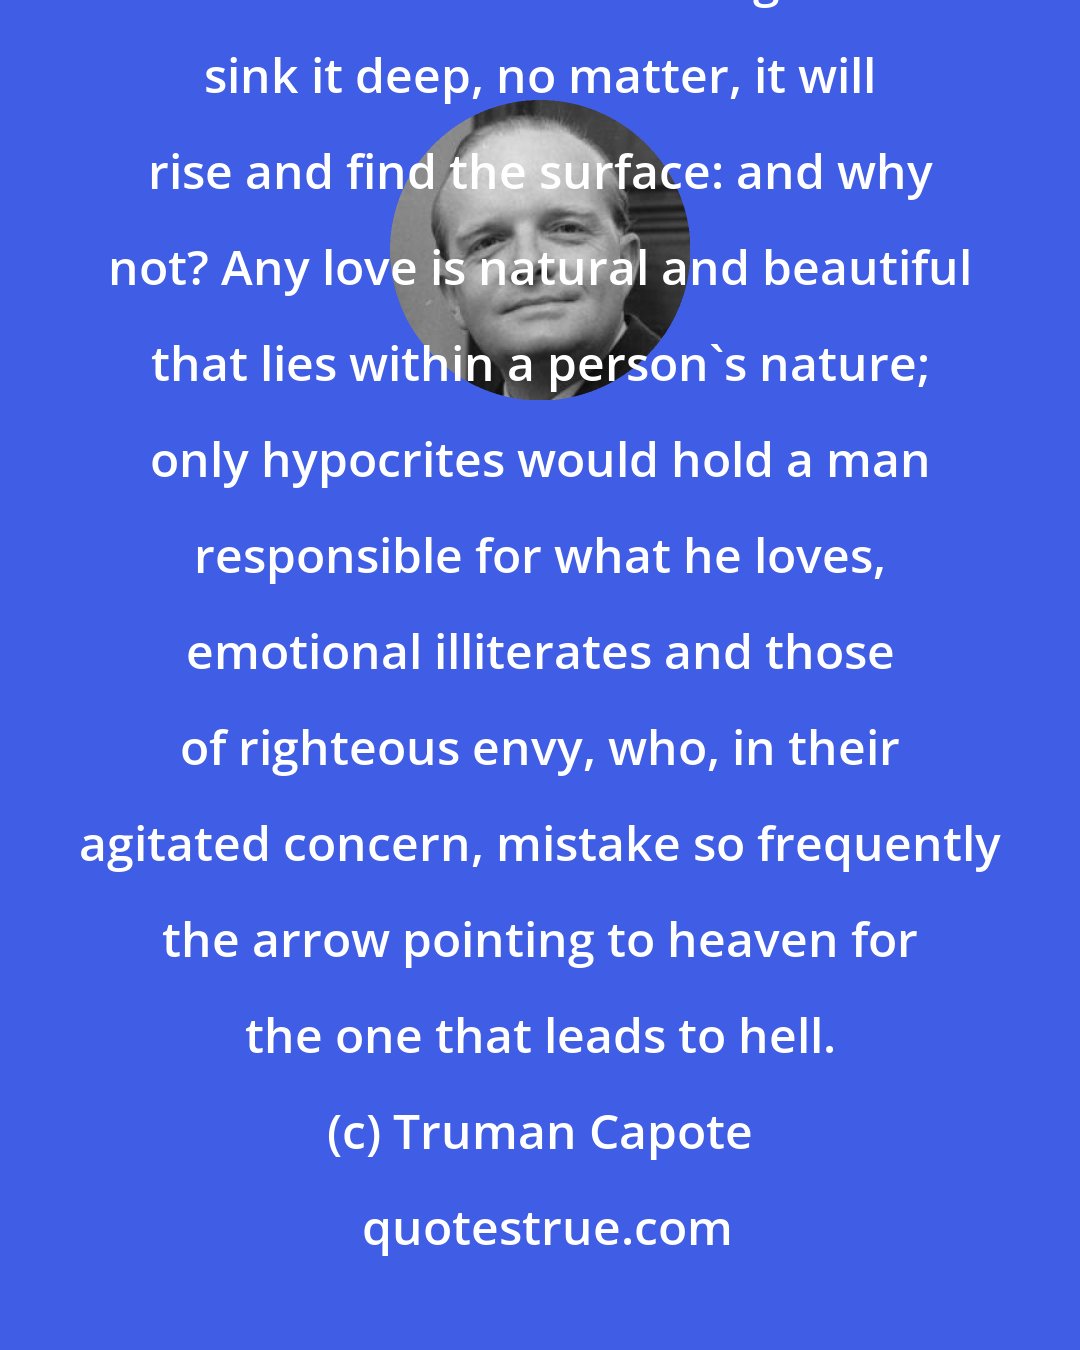 Truman Capote: The brain may take advice, but not the heart, and love having no geography, knows no boundaries: weight and sink it deep, no matter, it will rise and find the surface: and why not? Any love is natural and beautiful that lies within a person's nature; only hypocrites would hold a man responsible for what he loves, emotional illiterates and those of righteous envy, who, in their agitated concern, mistake so frequently the arrow pointing to heaven for the one that leads to hell.